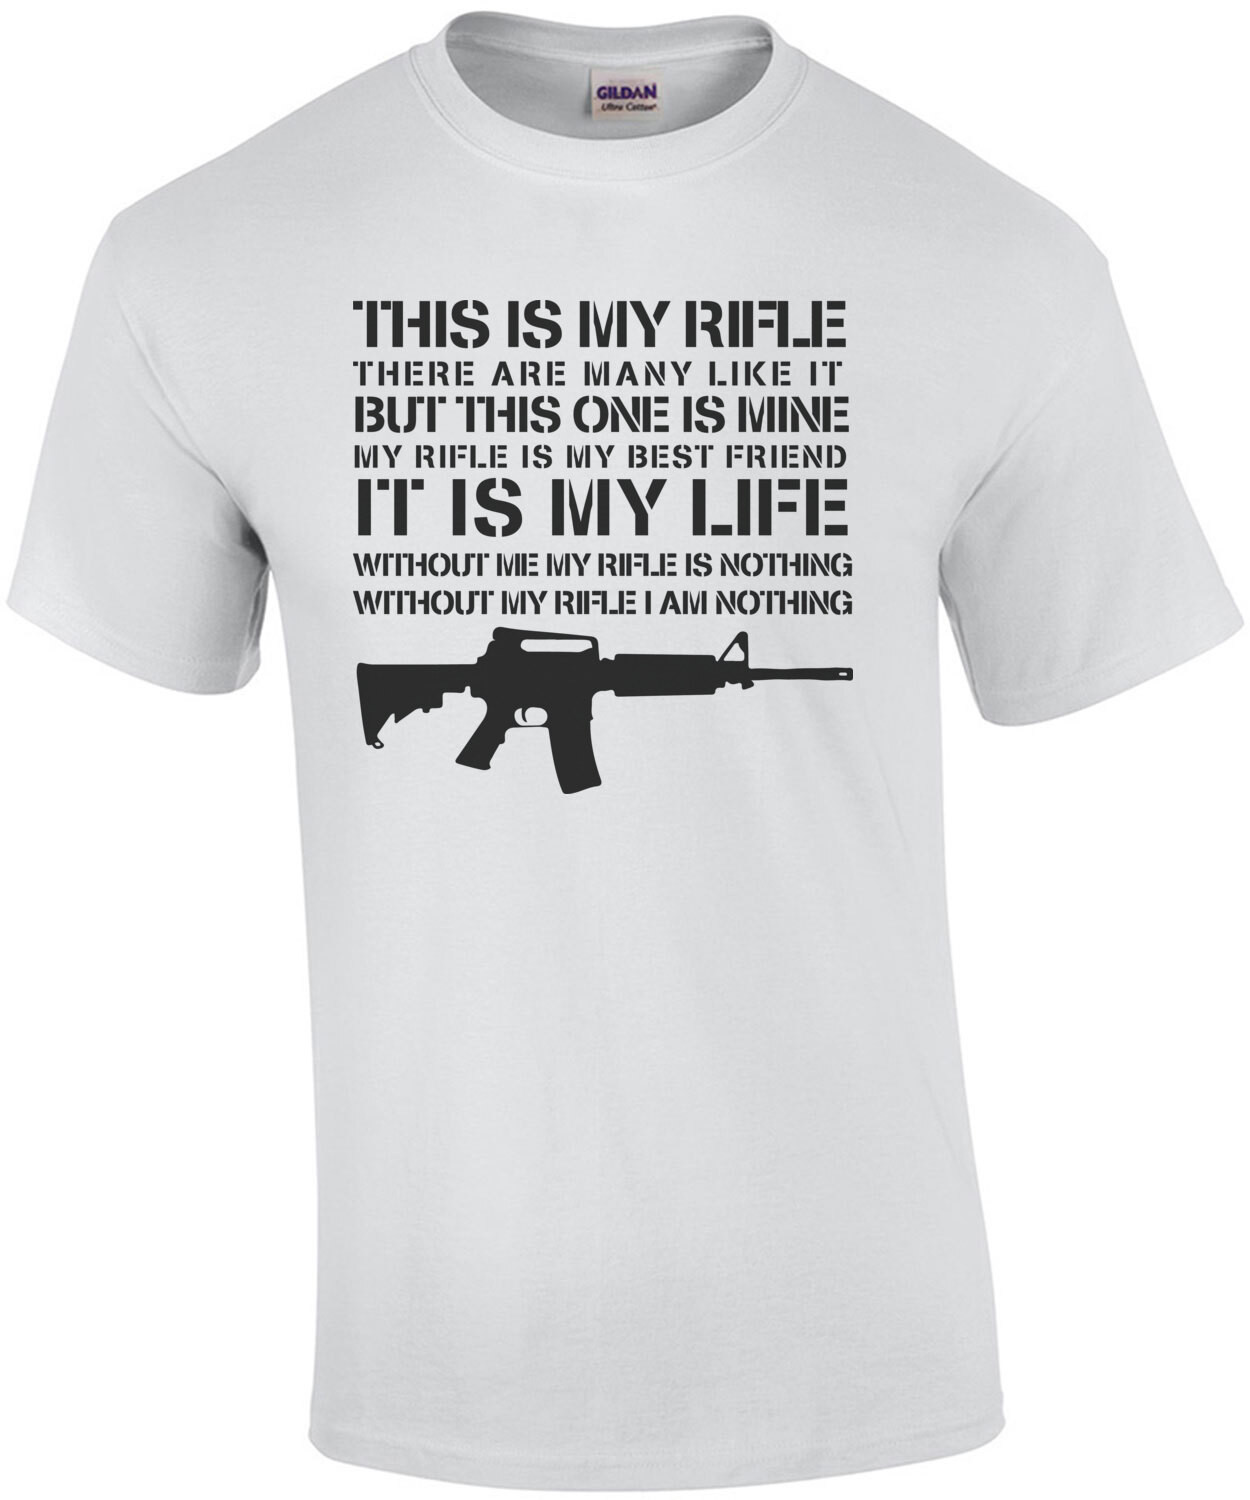 This is my rifle - There are many like it - but this one is mine - my rifle is my best friend - it is my life - without me my rifle is nothing without my rifle I am nothing - Gun T-Shirt - Full Metal Jacket - 80's T-Shirt